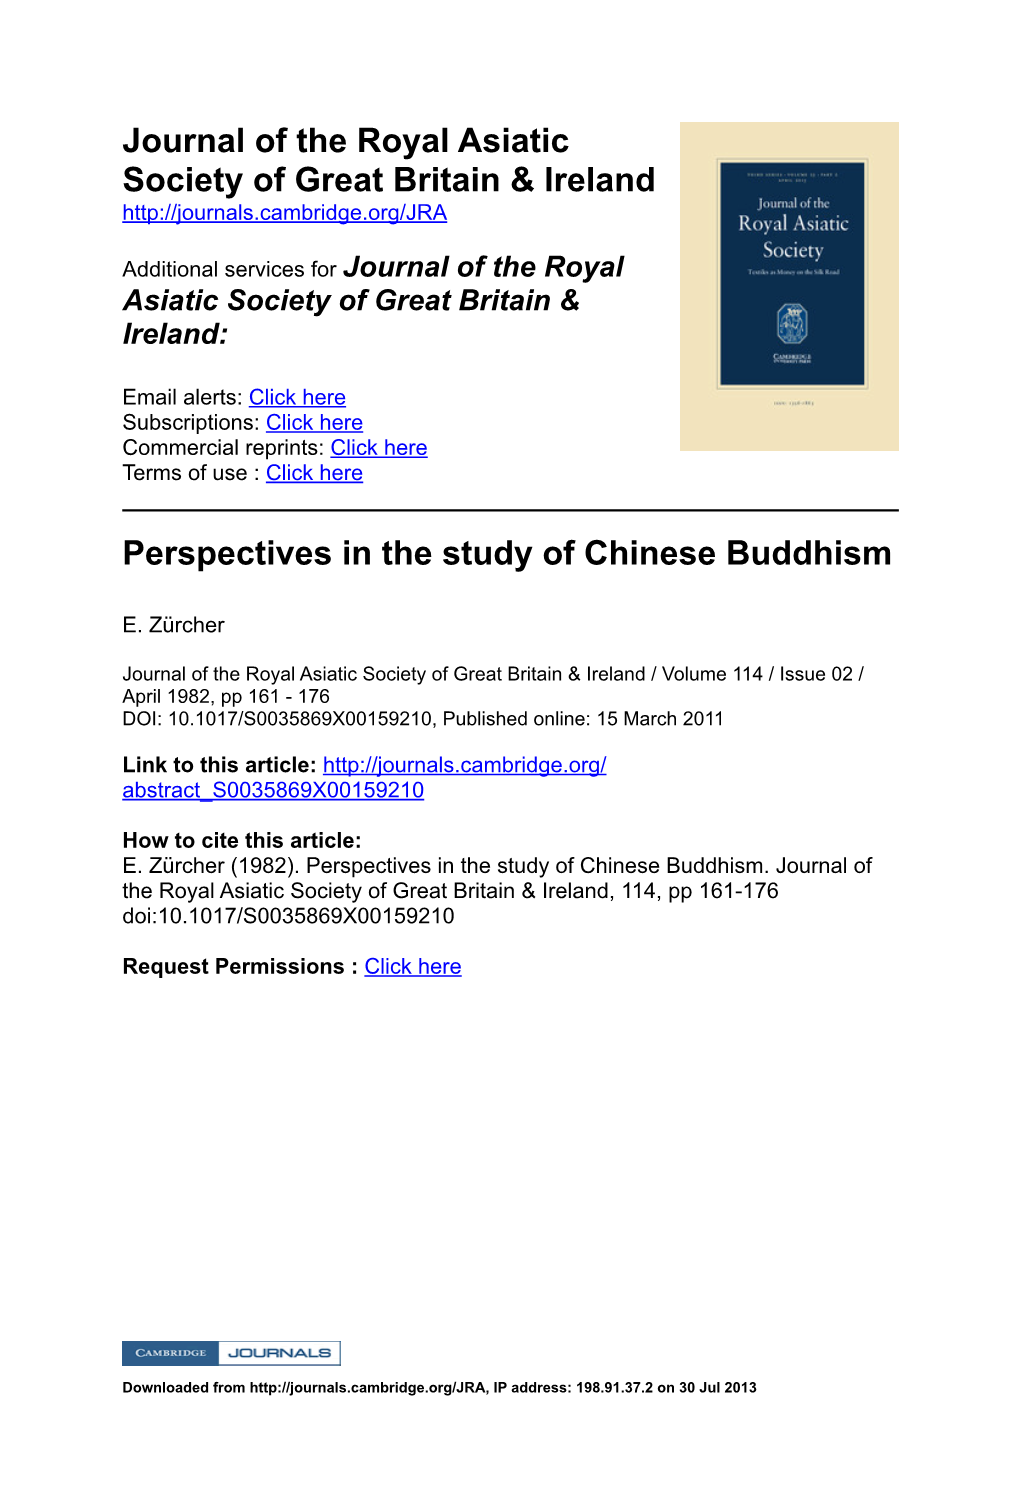 Journal of the Royal Asiatic Society of Great Britain & Ireland Perspectives